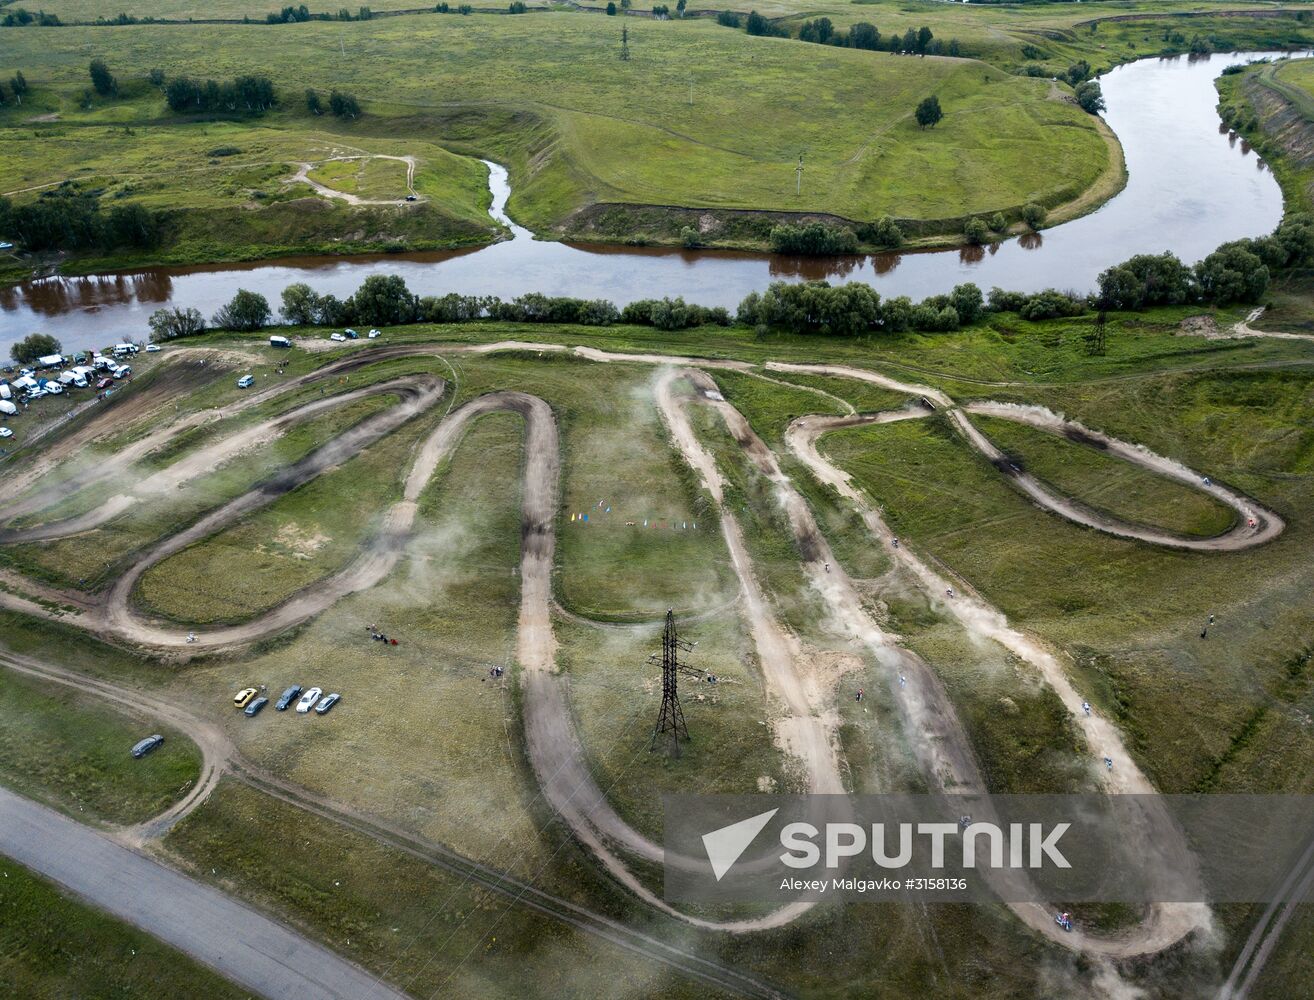 Round 2 of Siberian Federal District's motocross championship